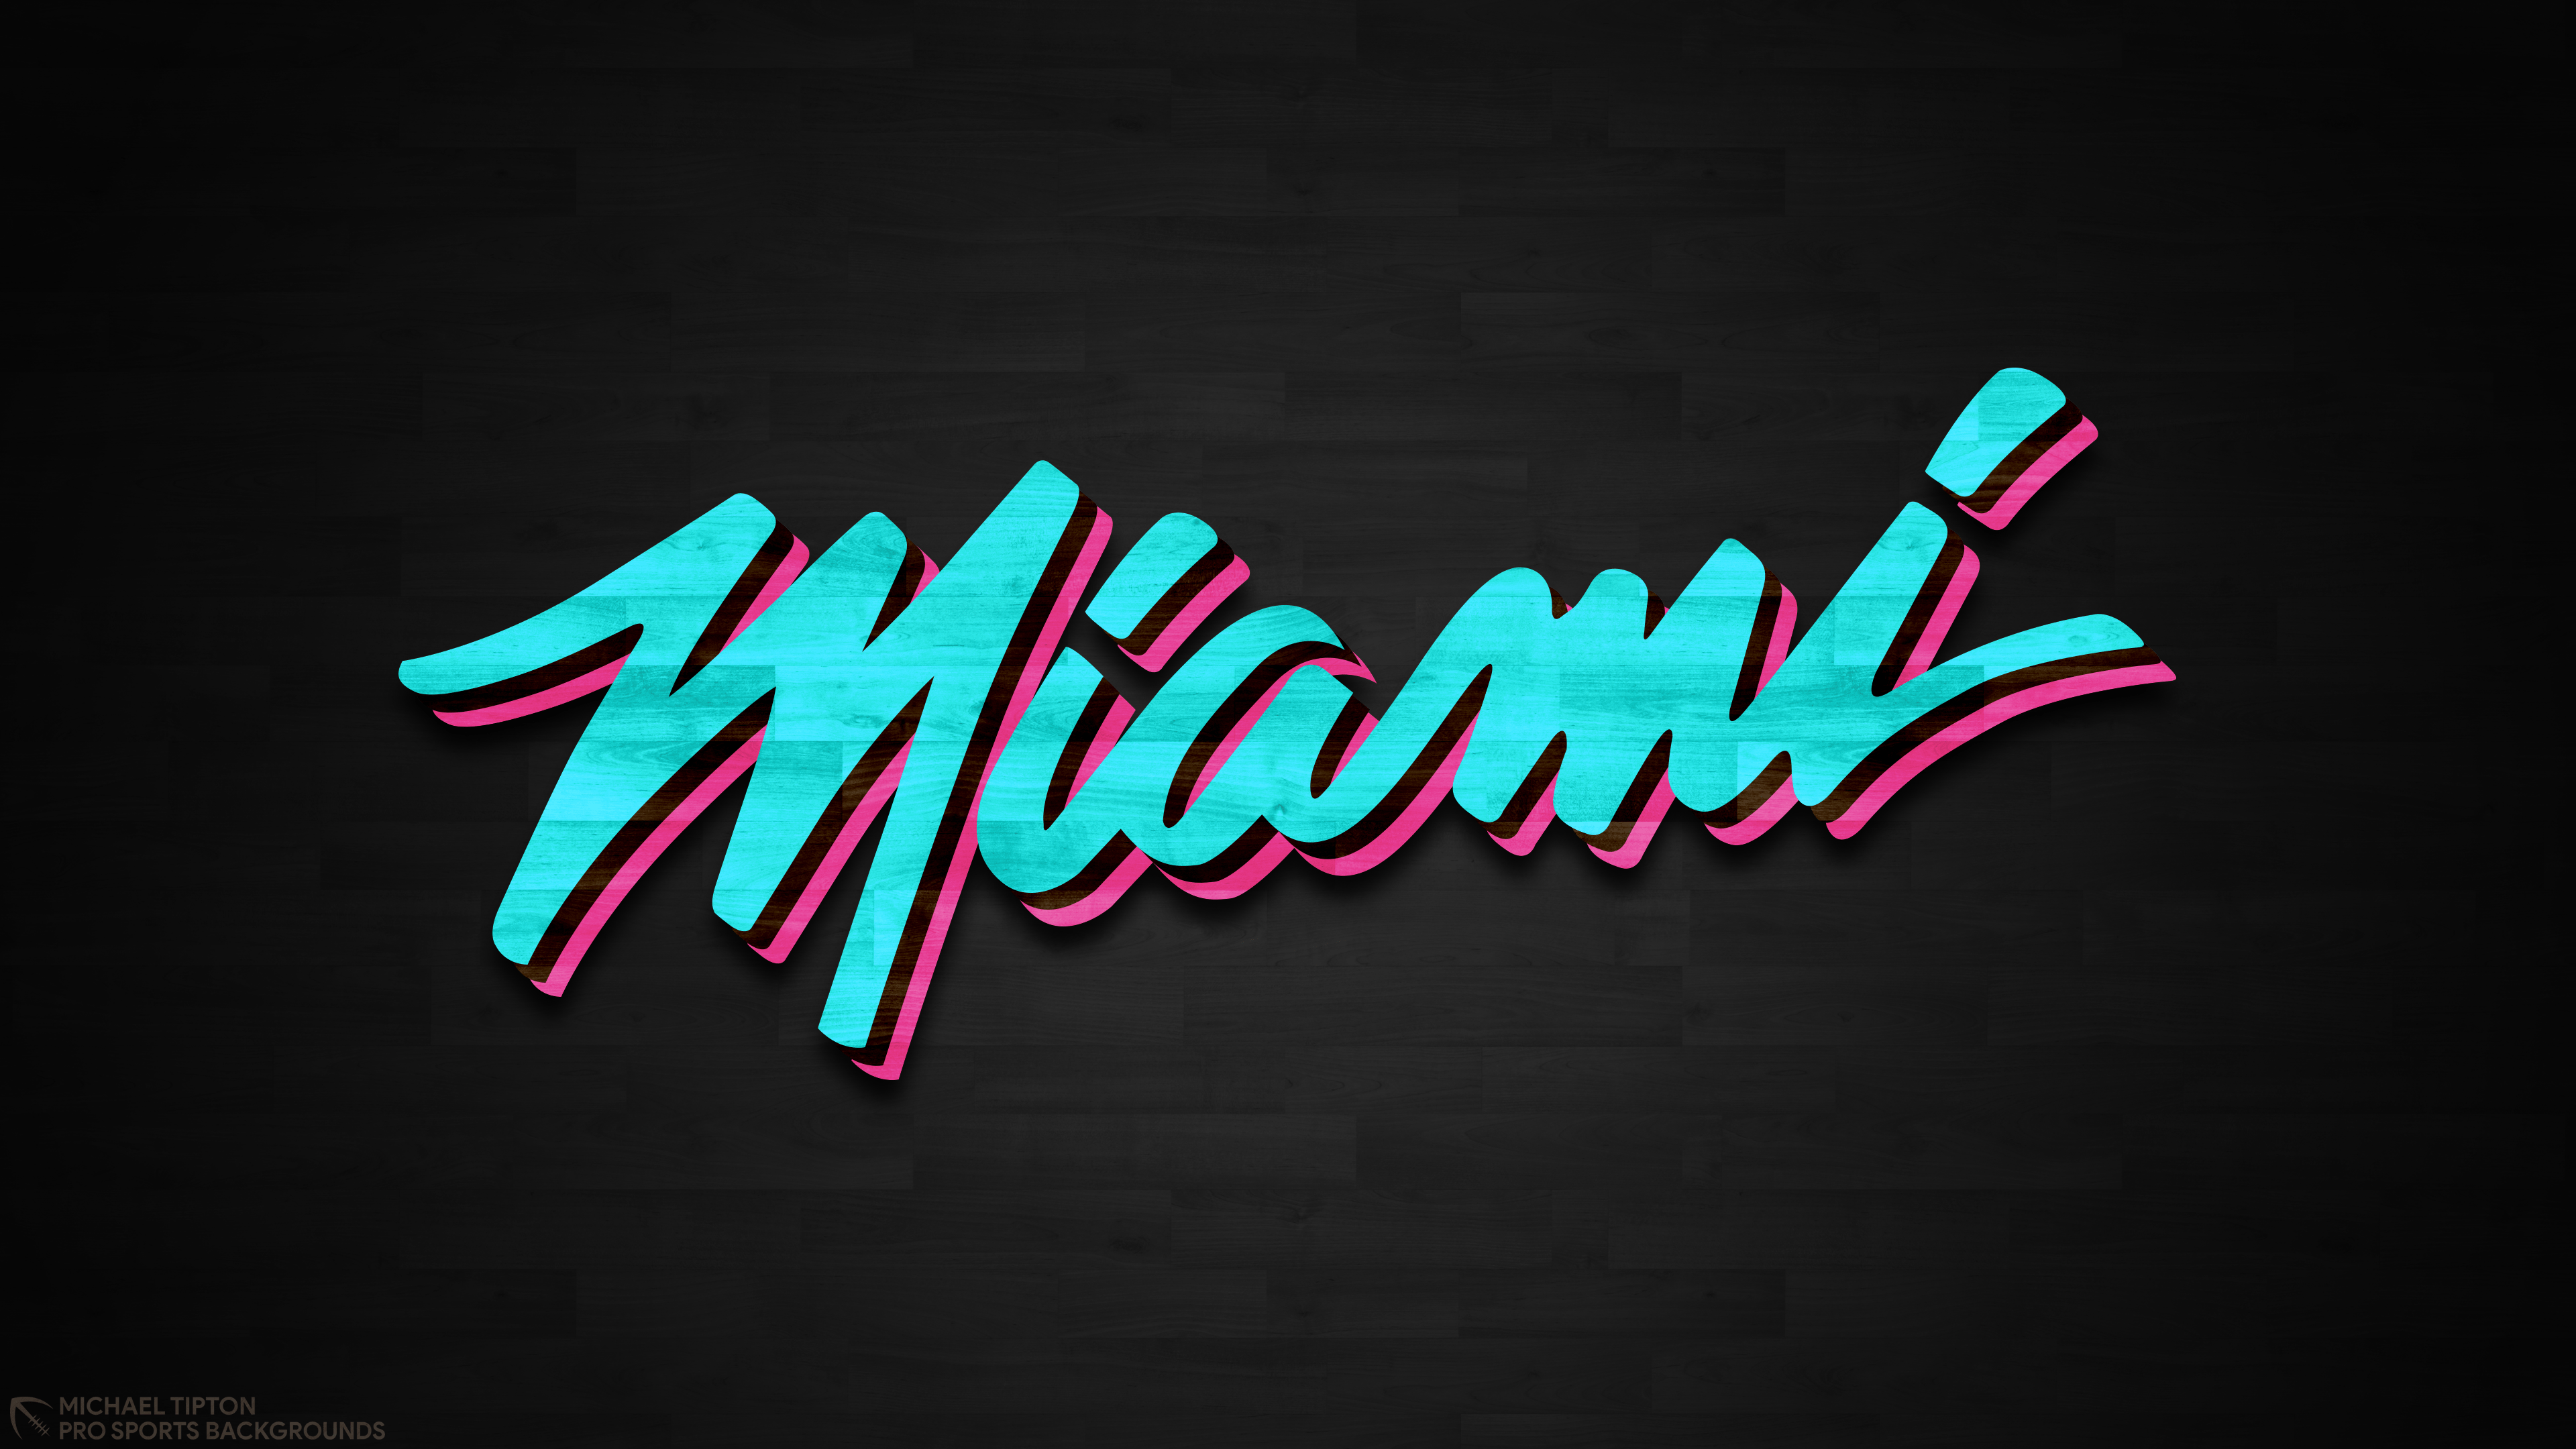 Miami Heat Wallpapers - Top Free Miami Heat Backgrounds - WallpaperAccess